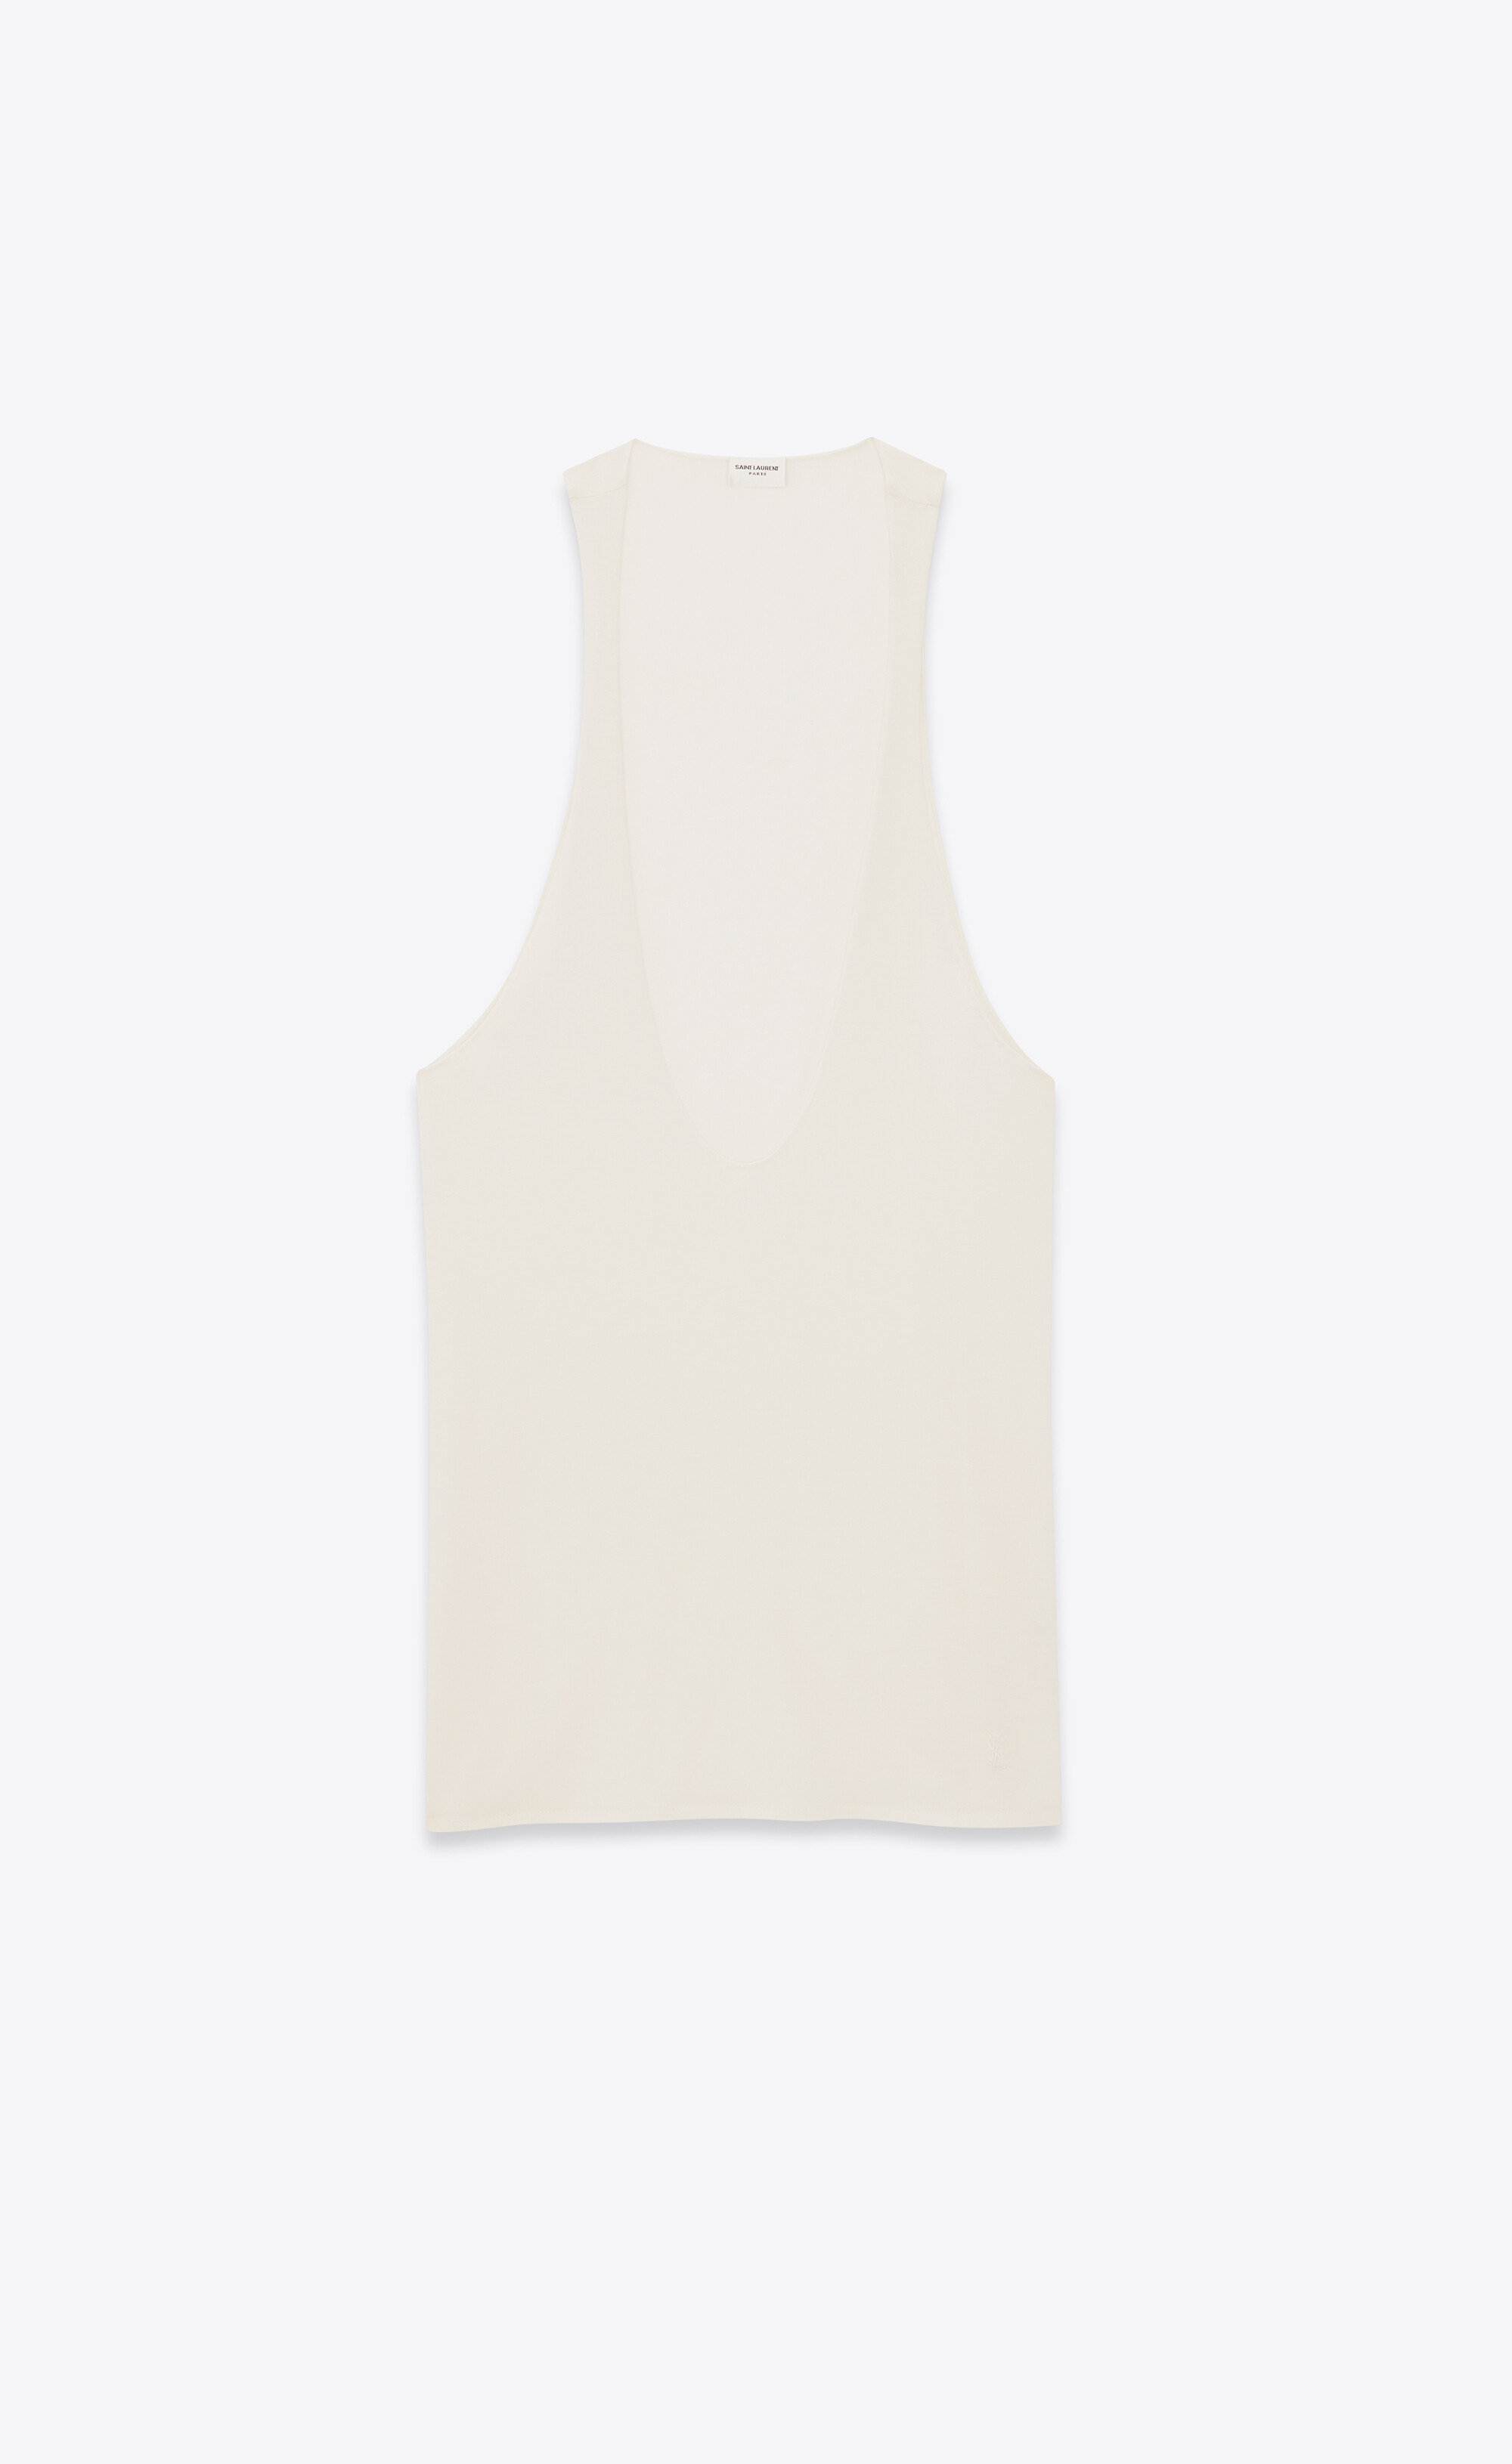 EMBROIDERED TANK TOP IN SILK JERSEY - OFF WHITE